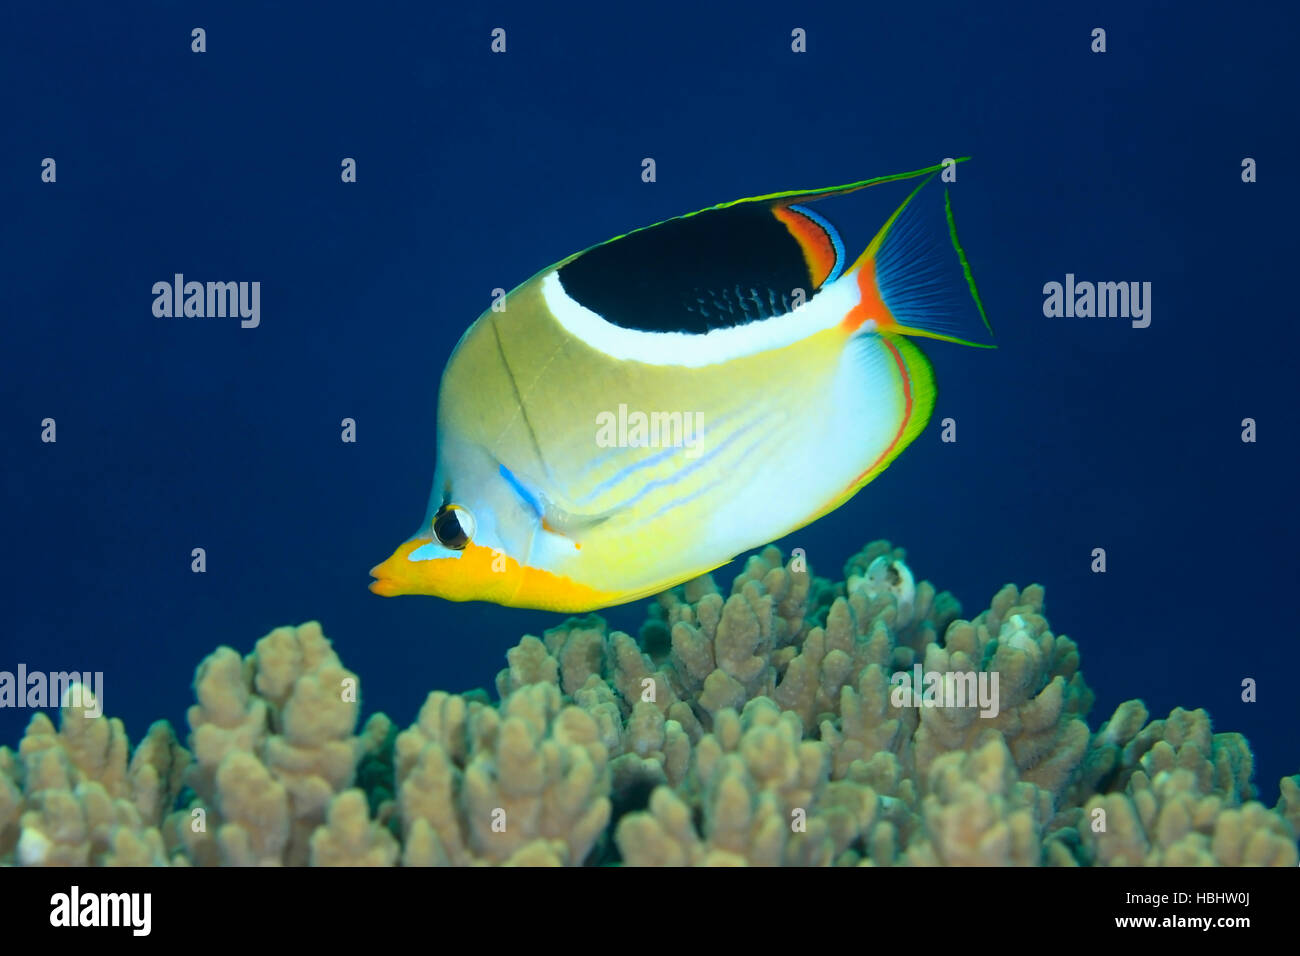 Saddled Butterflyfish, Chaetodon ephippium, swimming over coral reef with a deep blue water background. Stock Photo